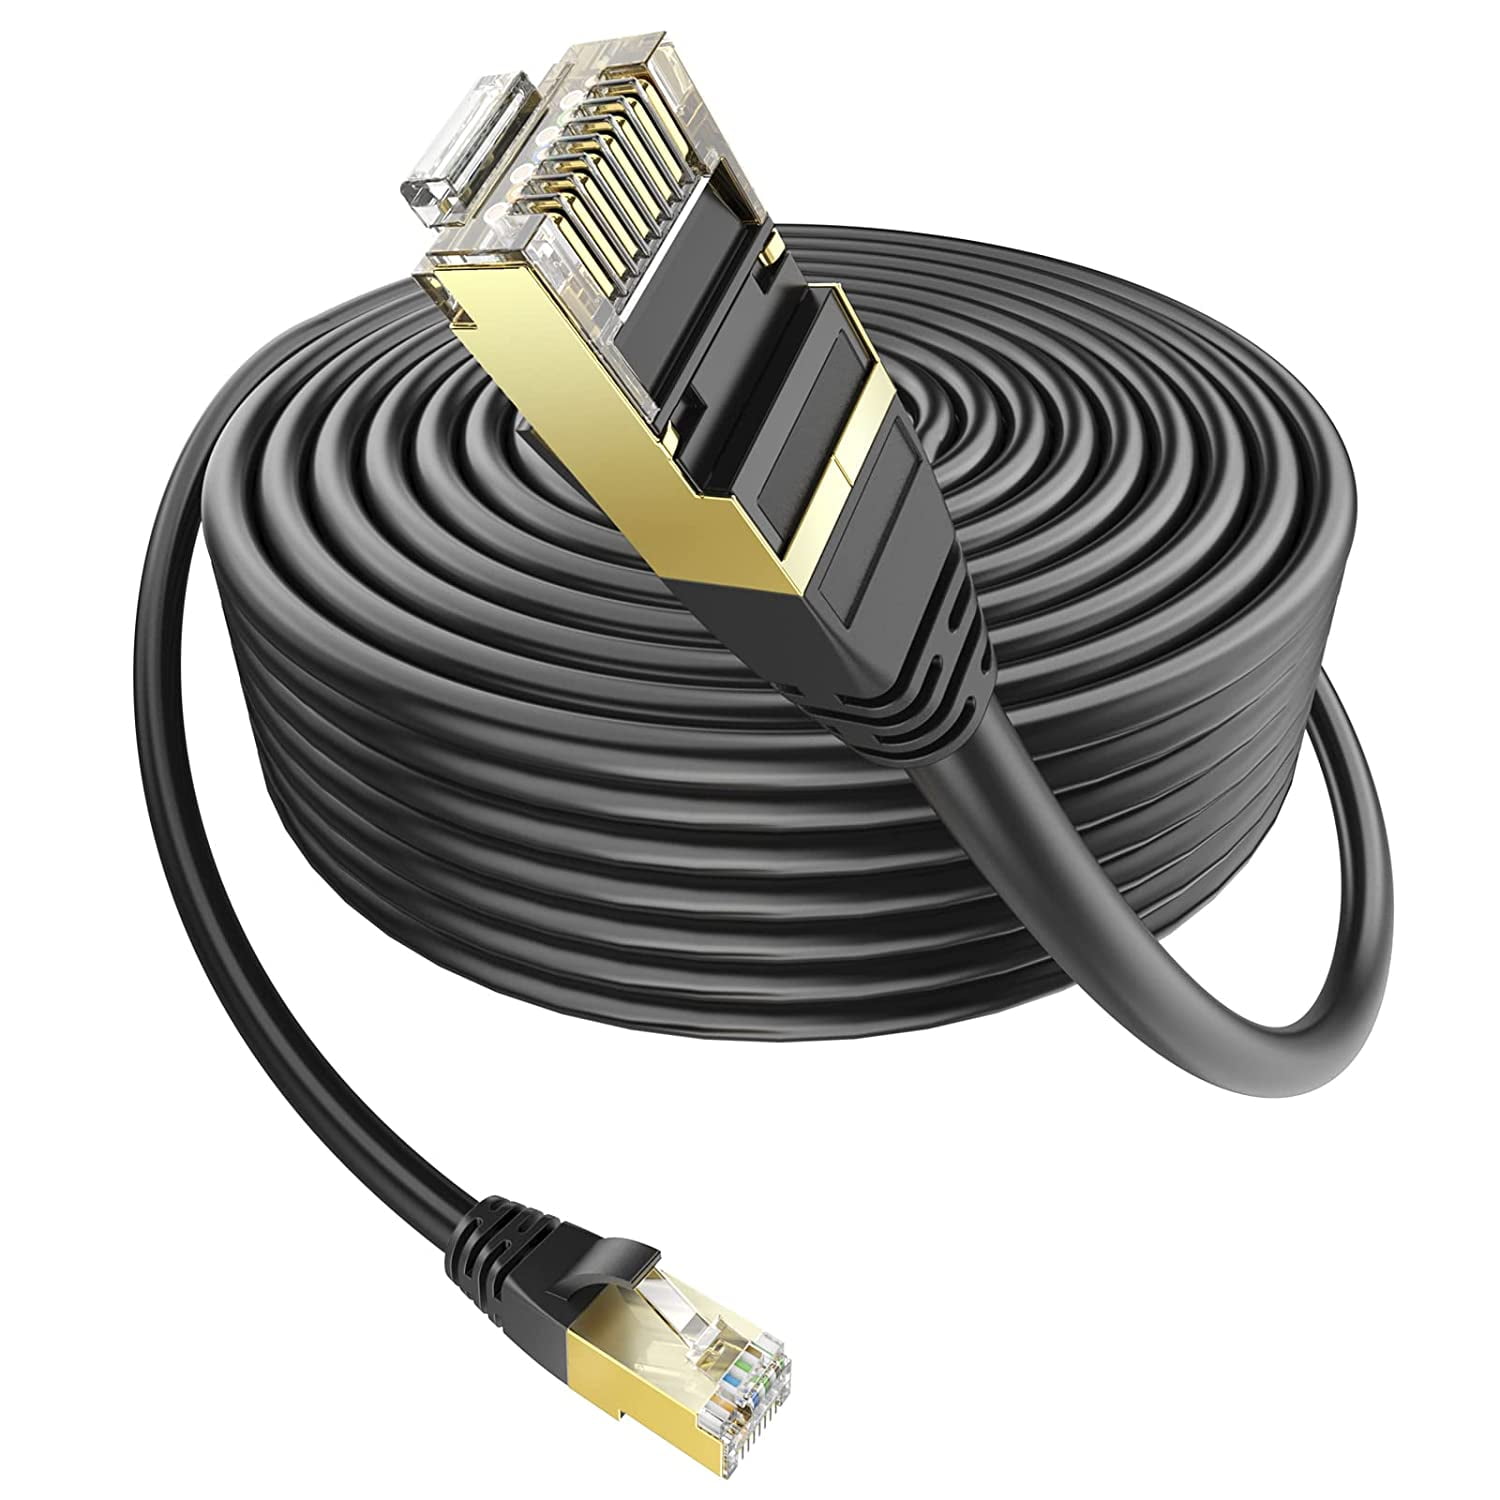 BlueRigger 4K HDMI Cable (100FT, Black) RJ45 CAT6 Ethernet Cable (50FT,  White) - 4K 30Hz, in-Wall CL3 Rated, 1Gbps, 550MHz, CAT6 Patch Cables